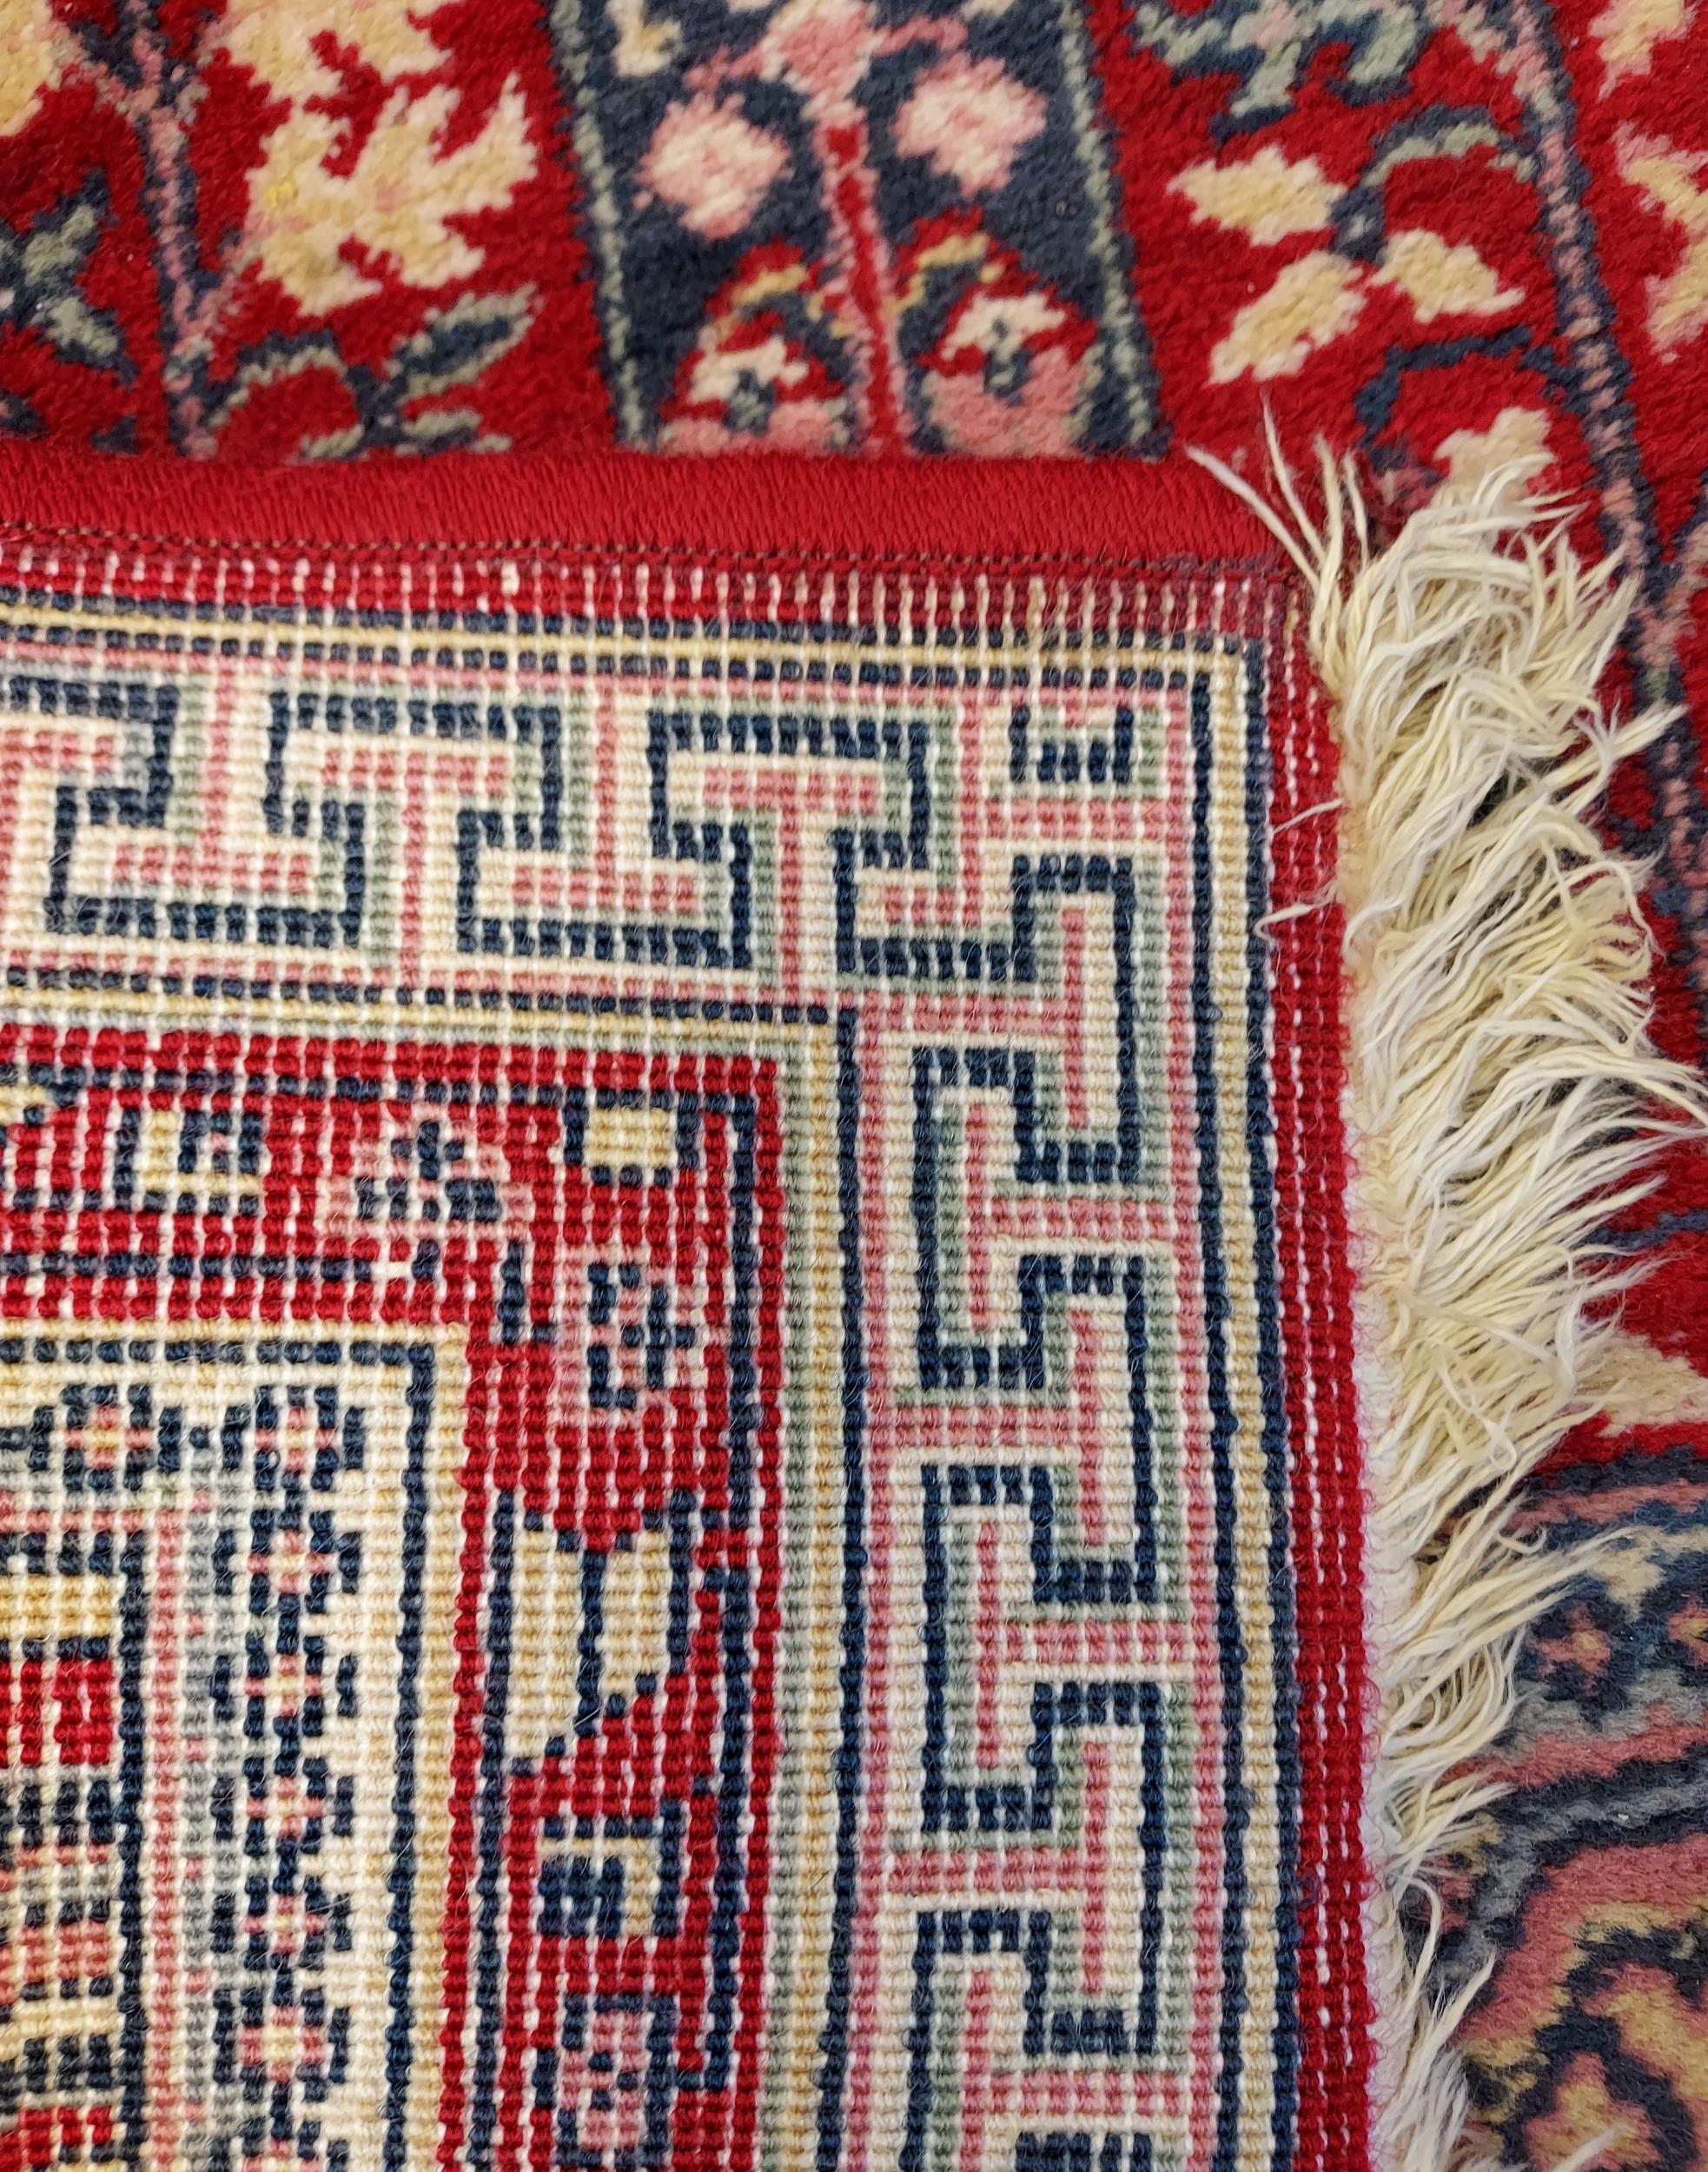 A Small fire side rug. - Image 2 of 3